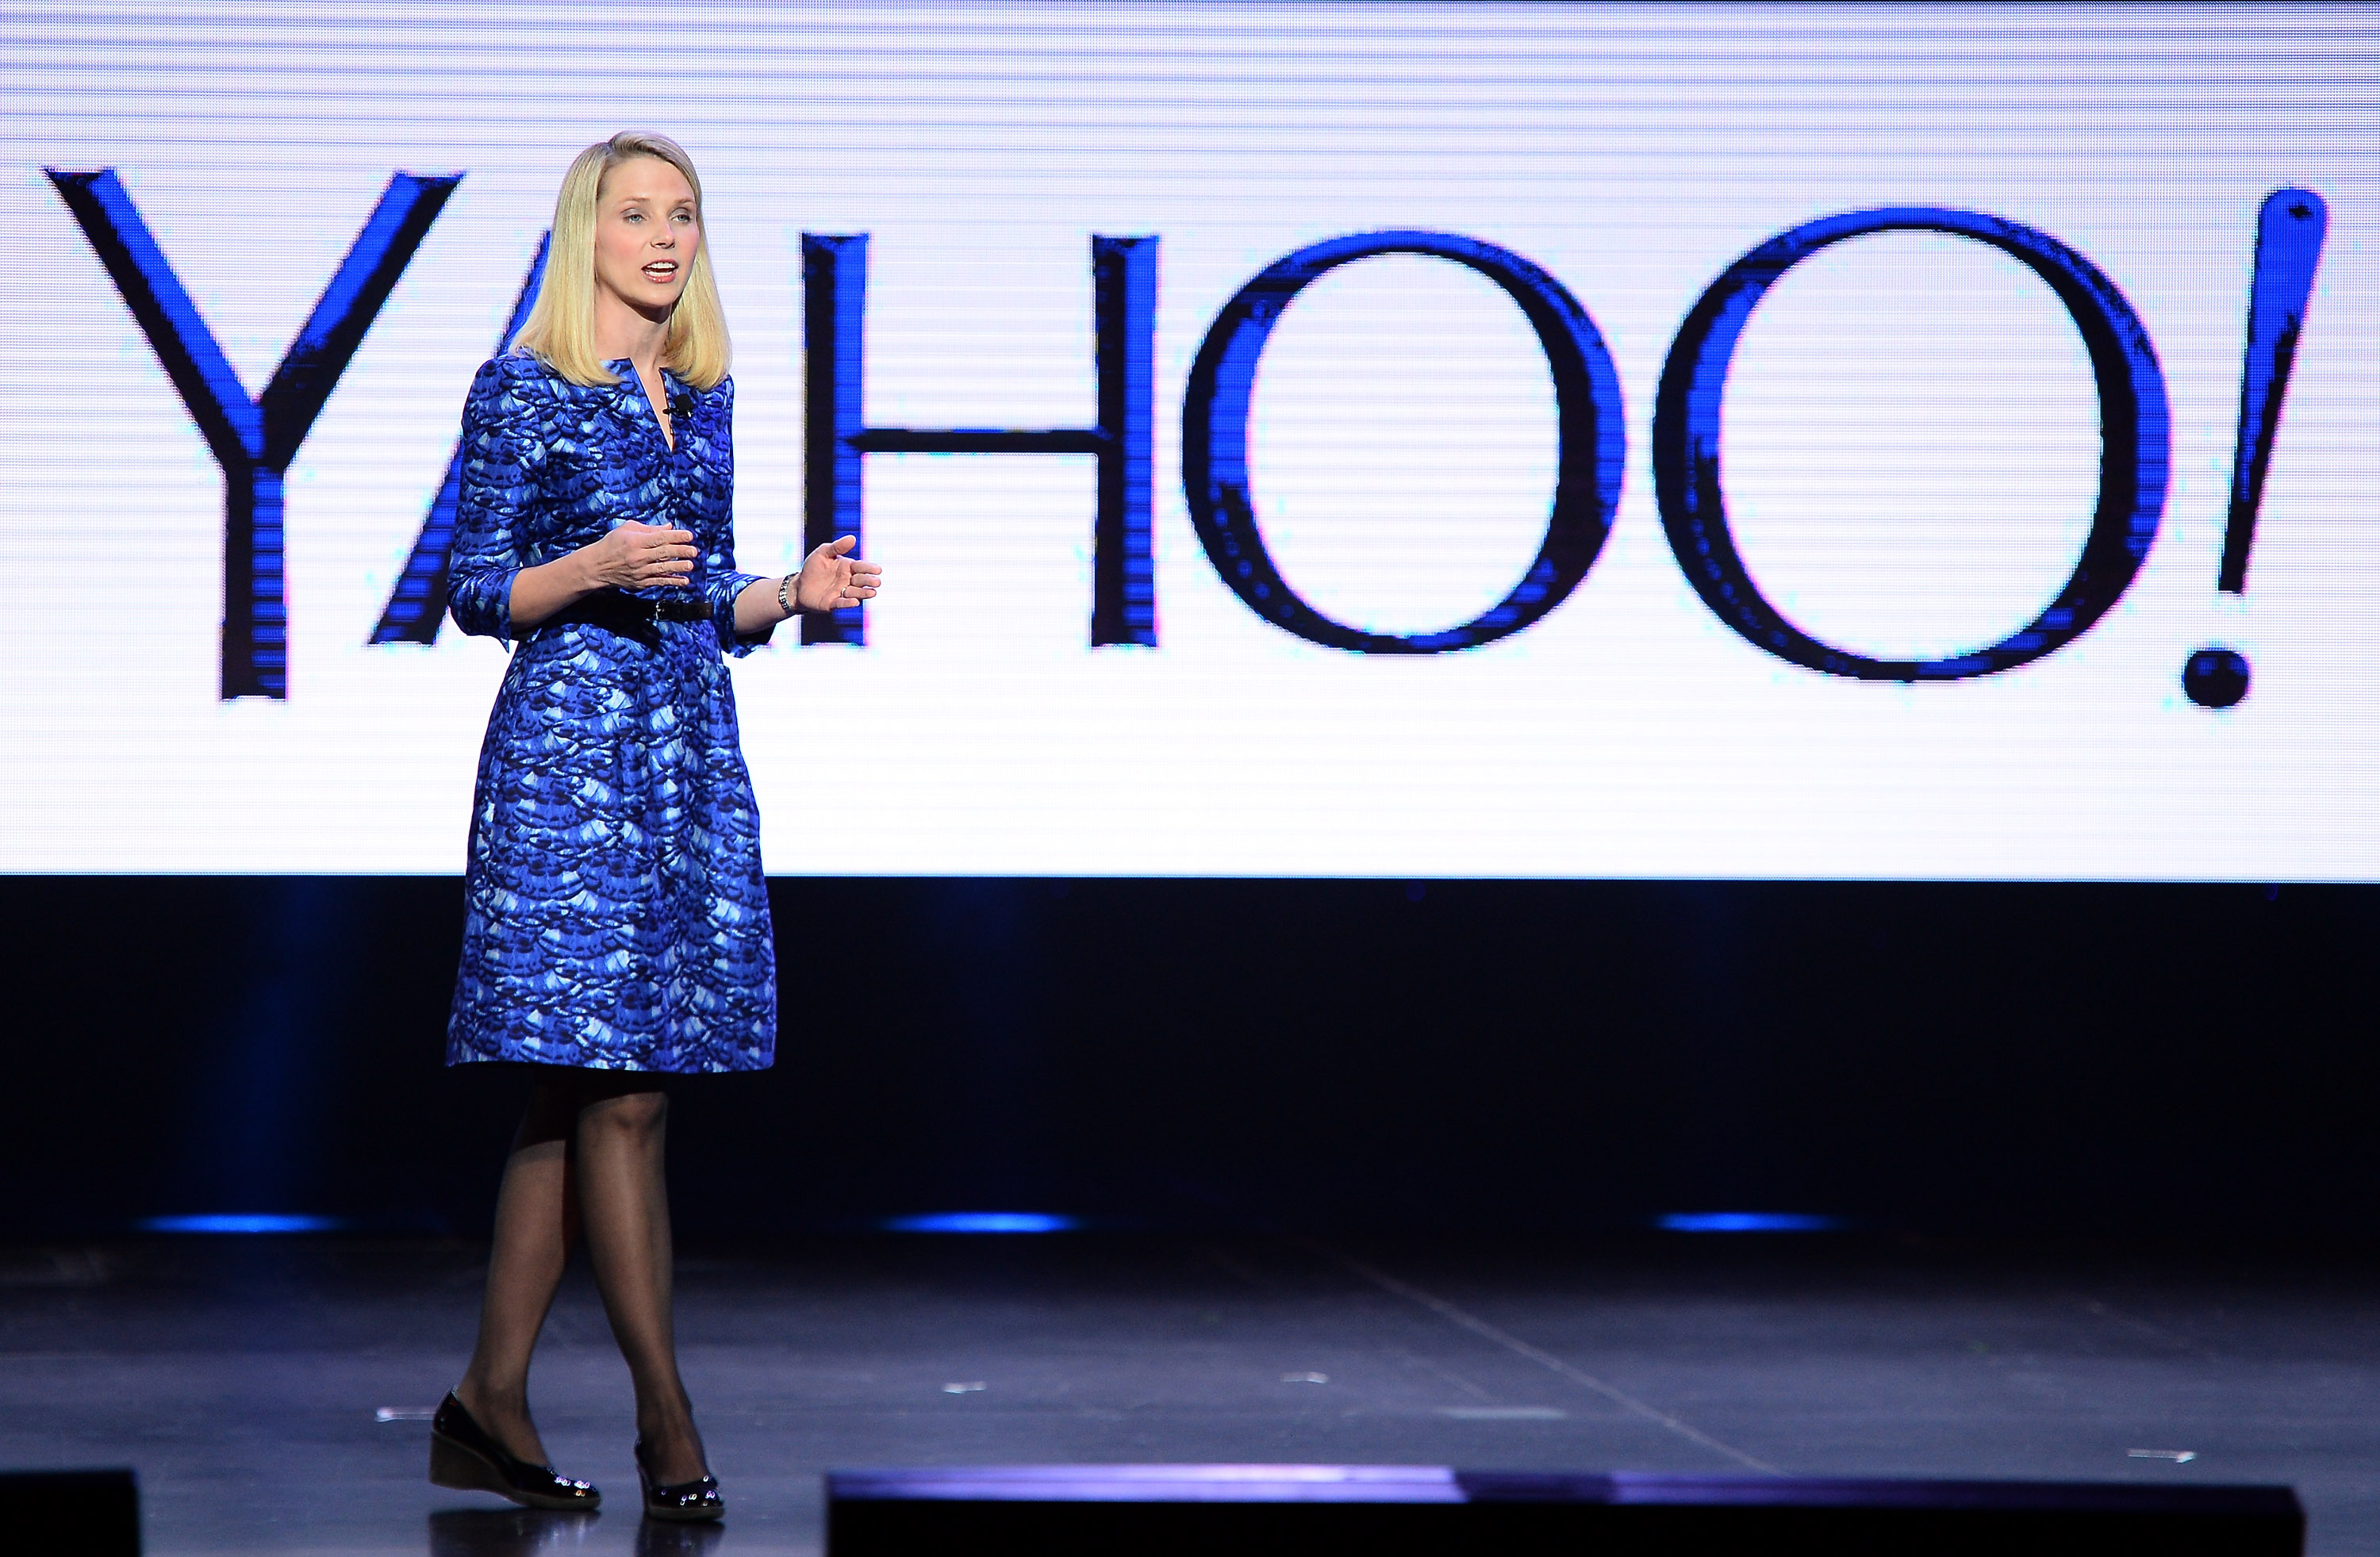 Yahoo! President and CEO Marissa Mayer delivers a keynote address at the 2014 International CES in Las Vegas, Nevada. (Ethan Miller—Getty Images)